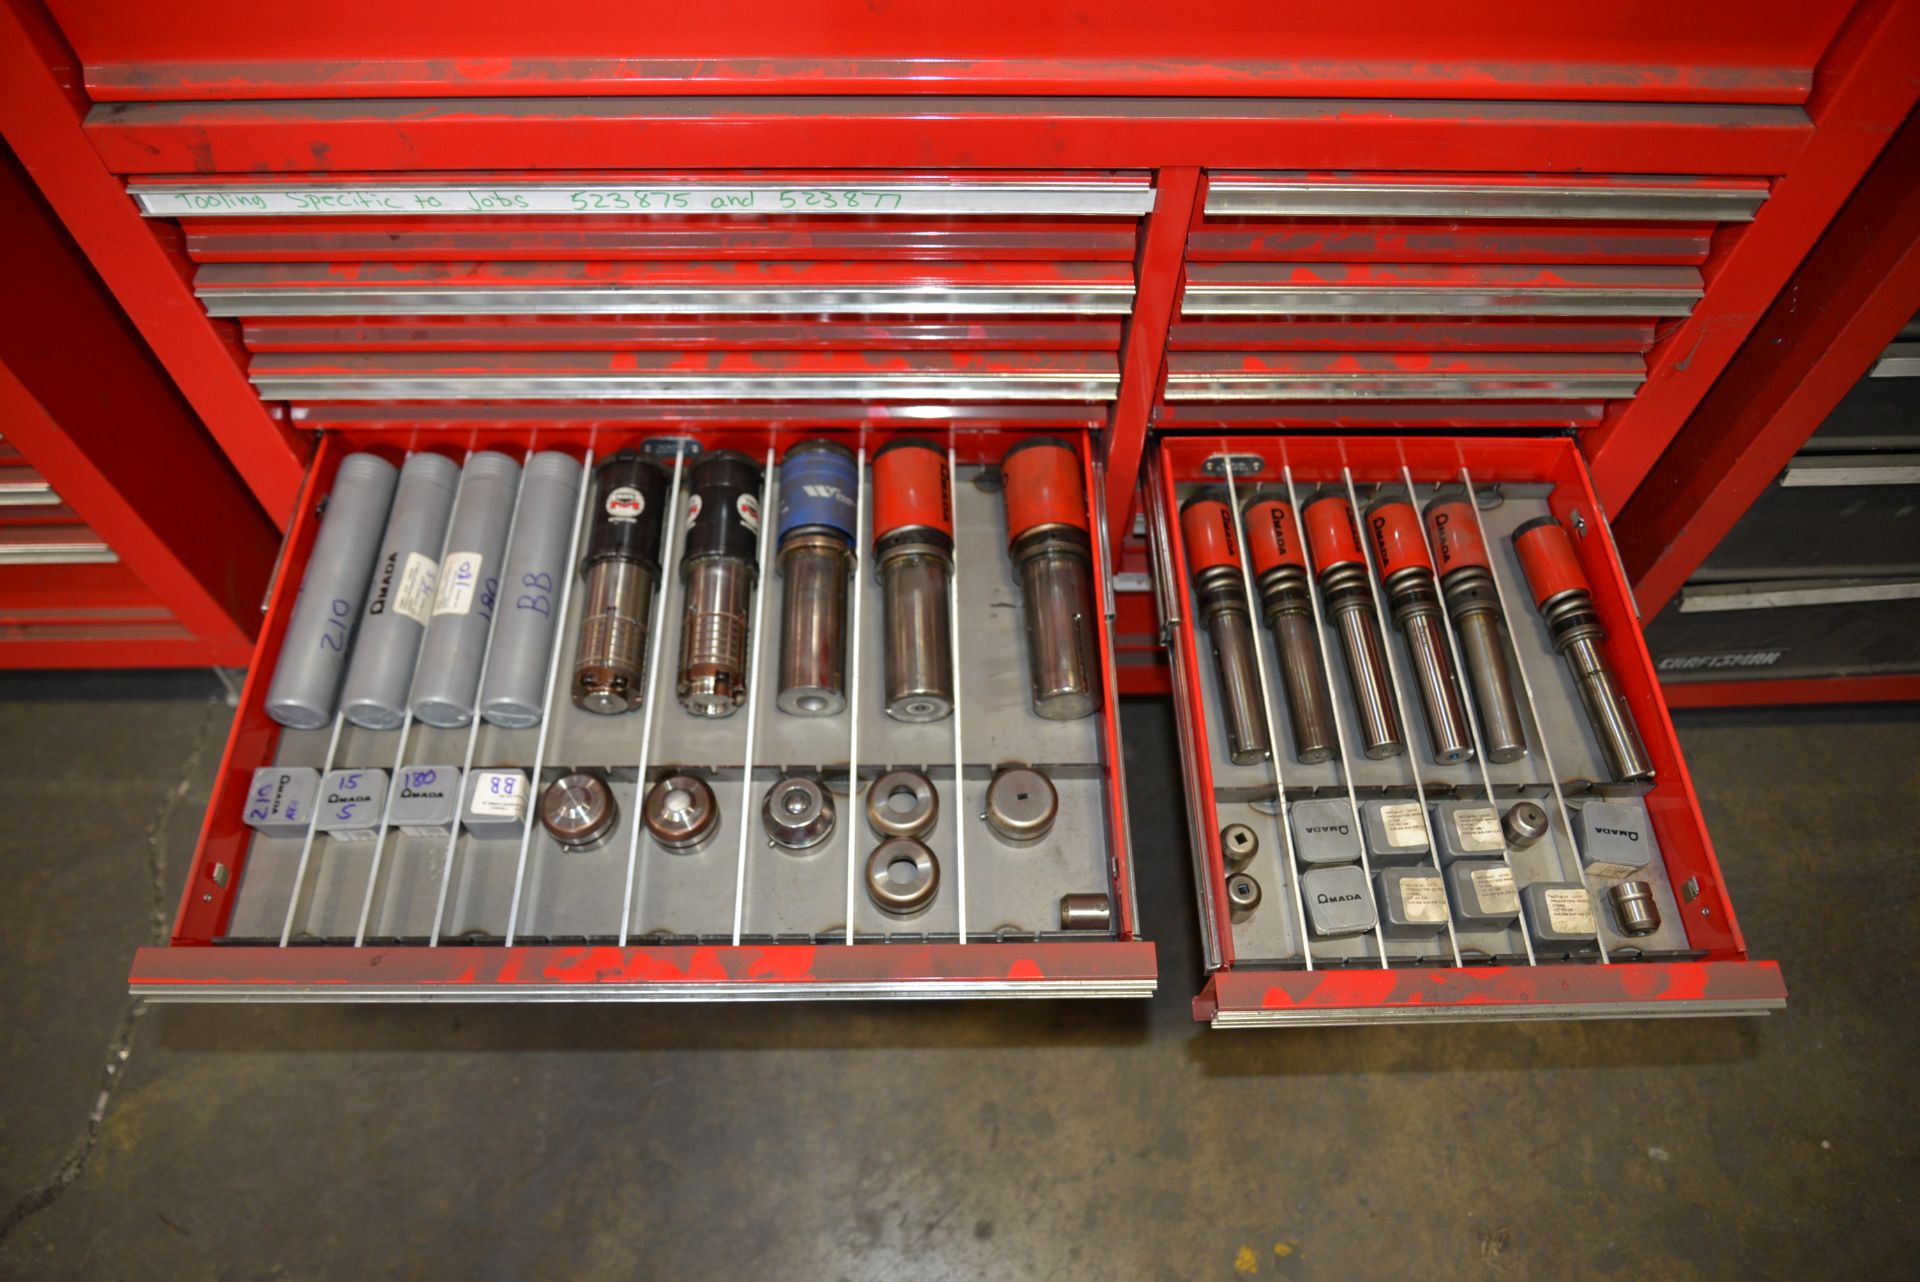 US GENERAL TOOL CHEST FULL OF AMADA TOOLING - Image 6 of 8